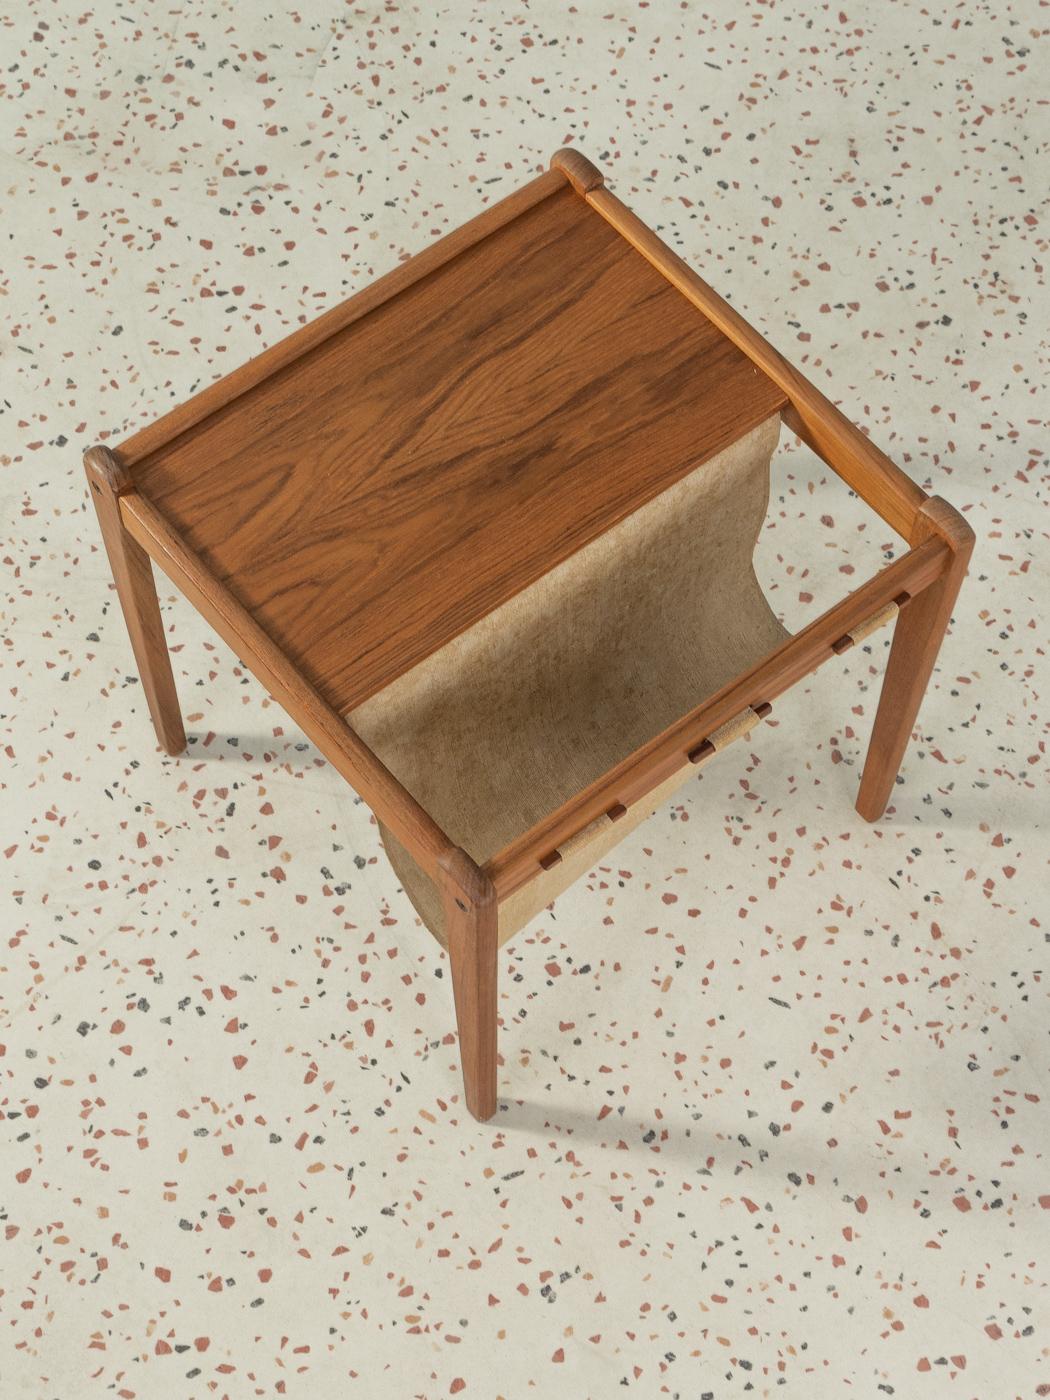 Wonderful magazine rack from the 1960s. Solid teak frame and a table top in teak veneer with a small magazine tray made of fabric.

Quality Features:
very good workmanship
high-quality materials
Made in Denmark, Design/manufacturer: S.P.